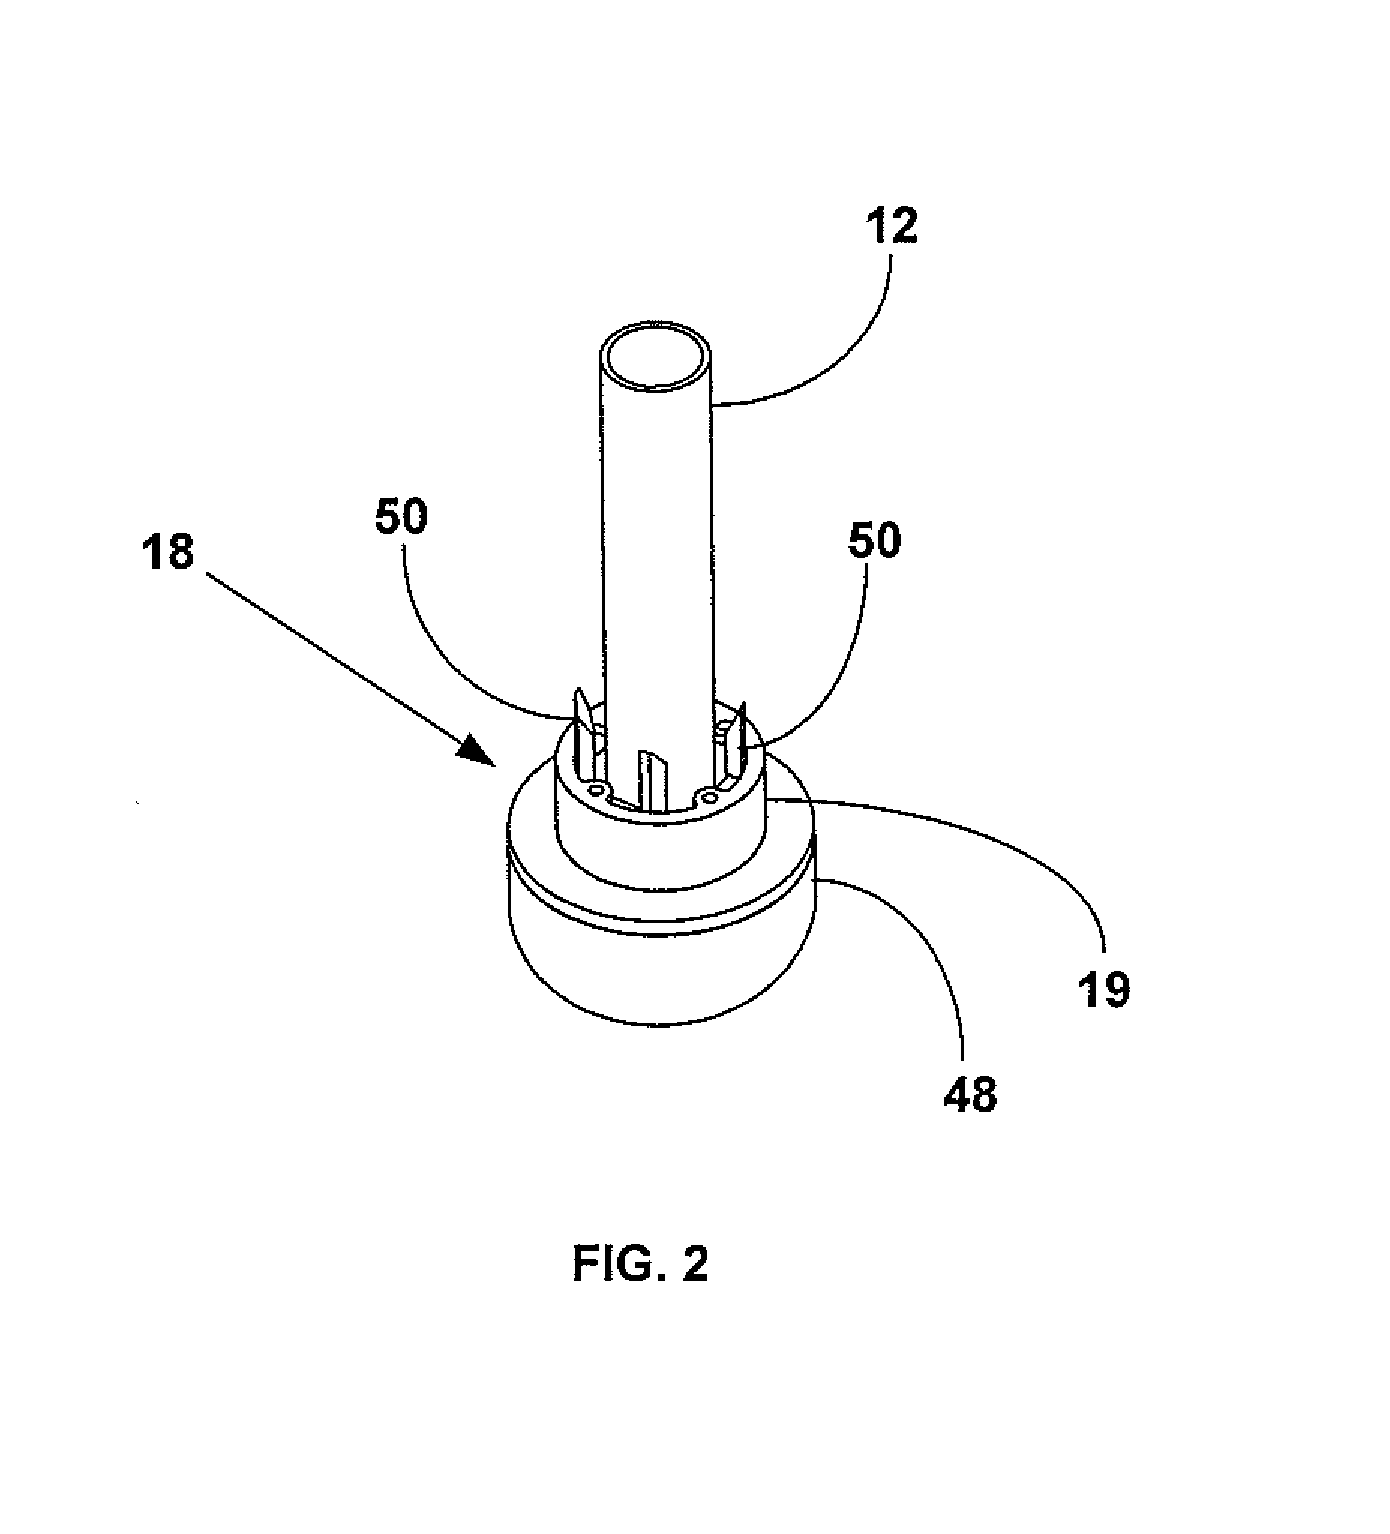 Programmable Random Access Sample Handler For Use Within an Automated Laboratory System